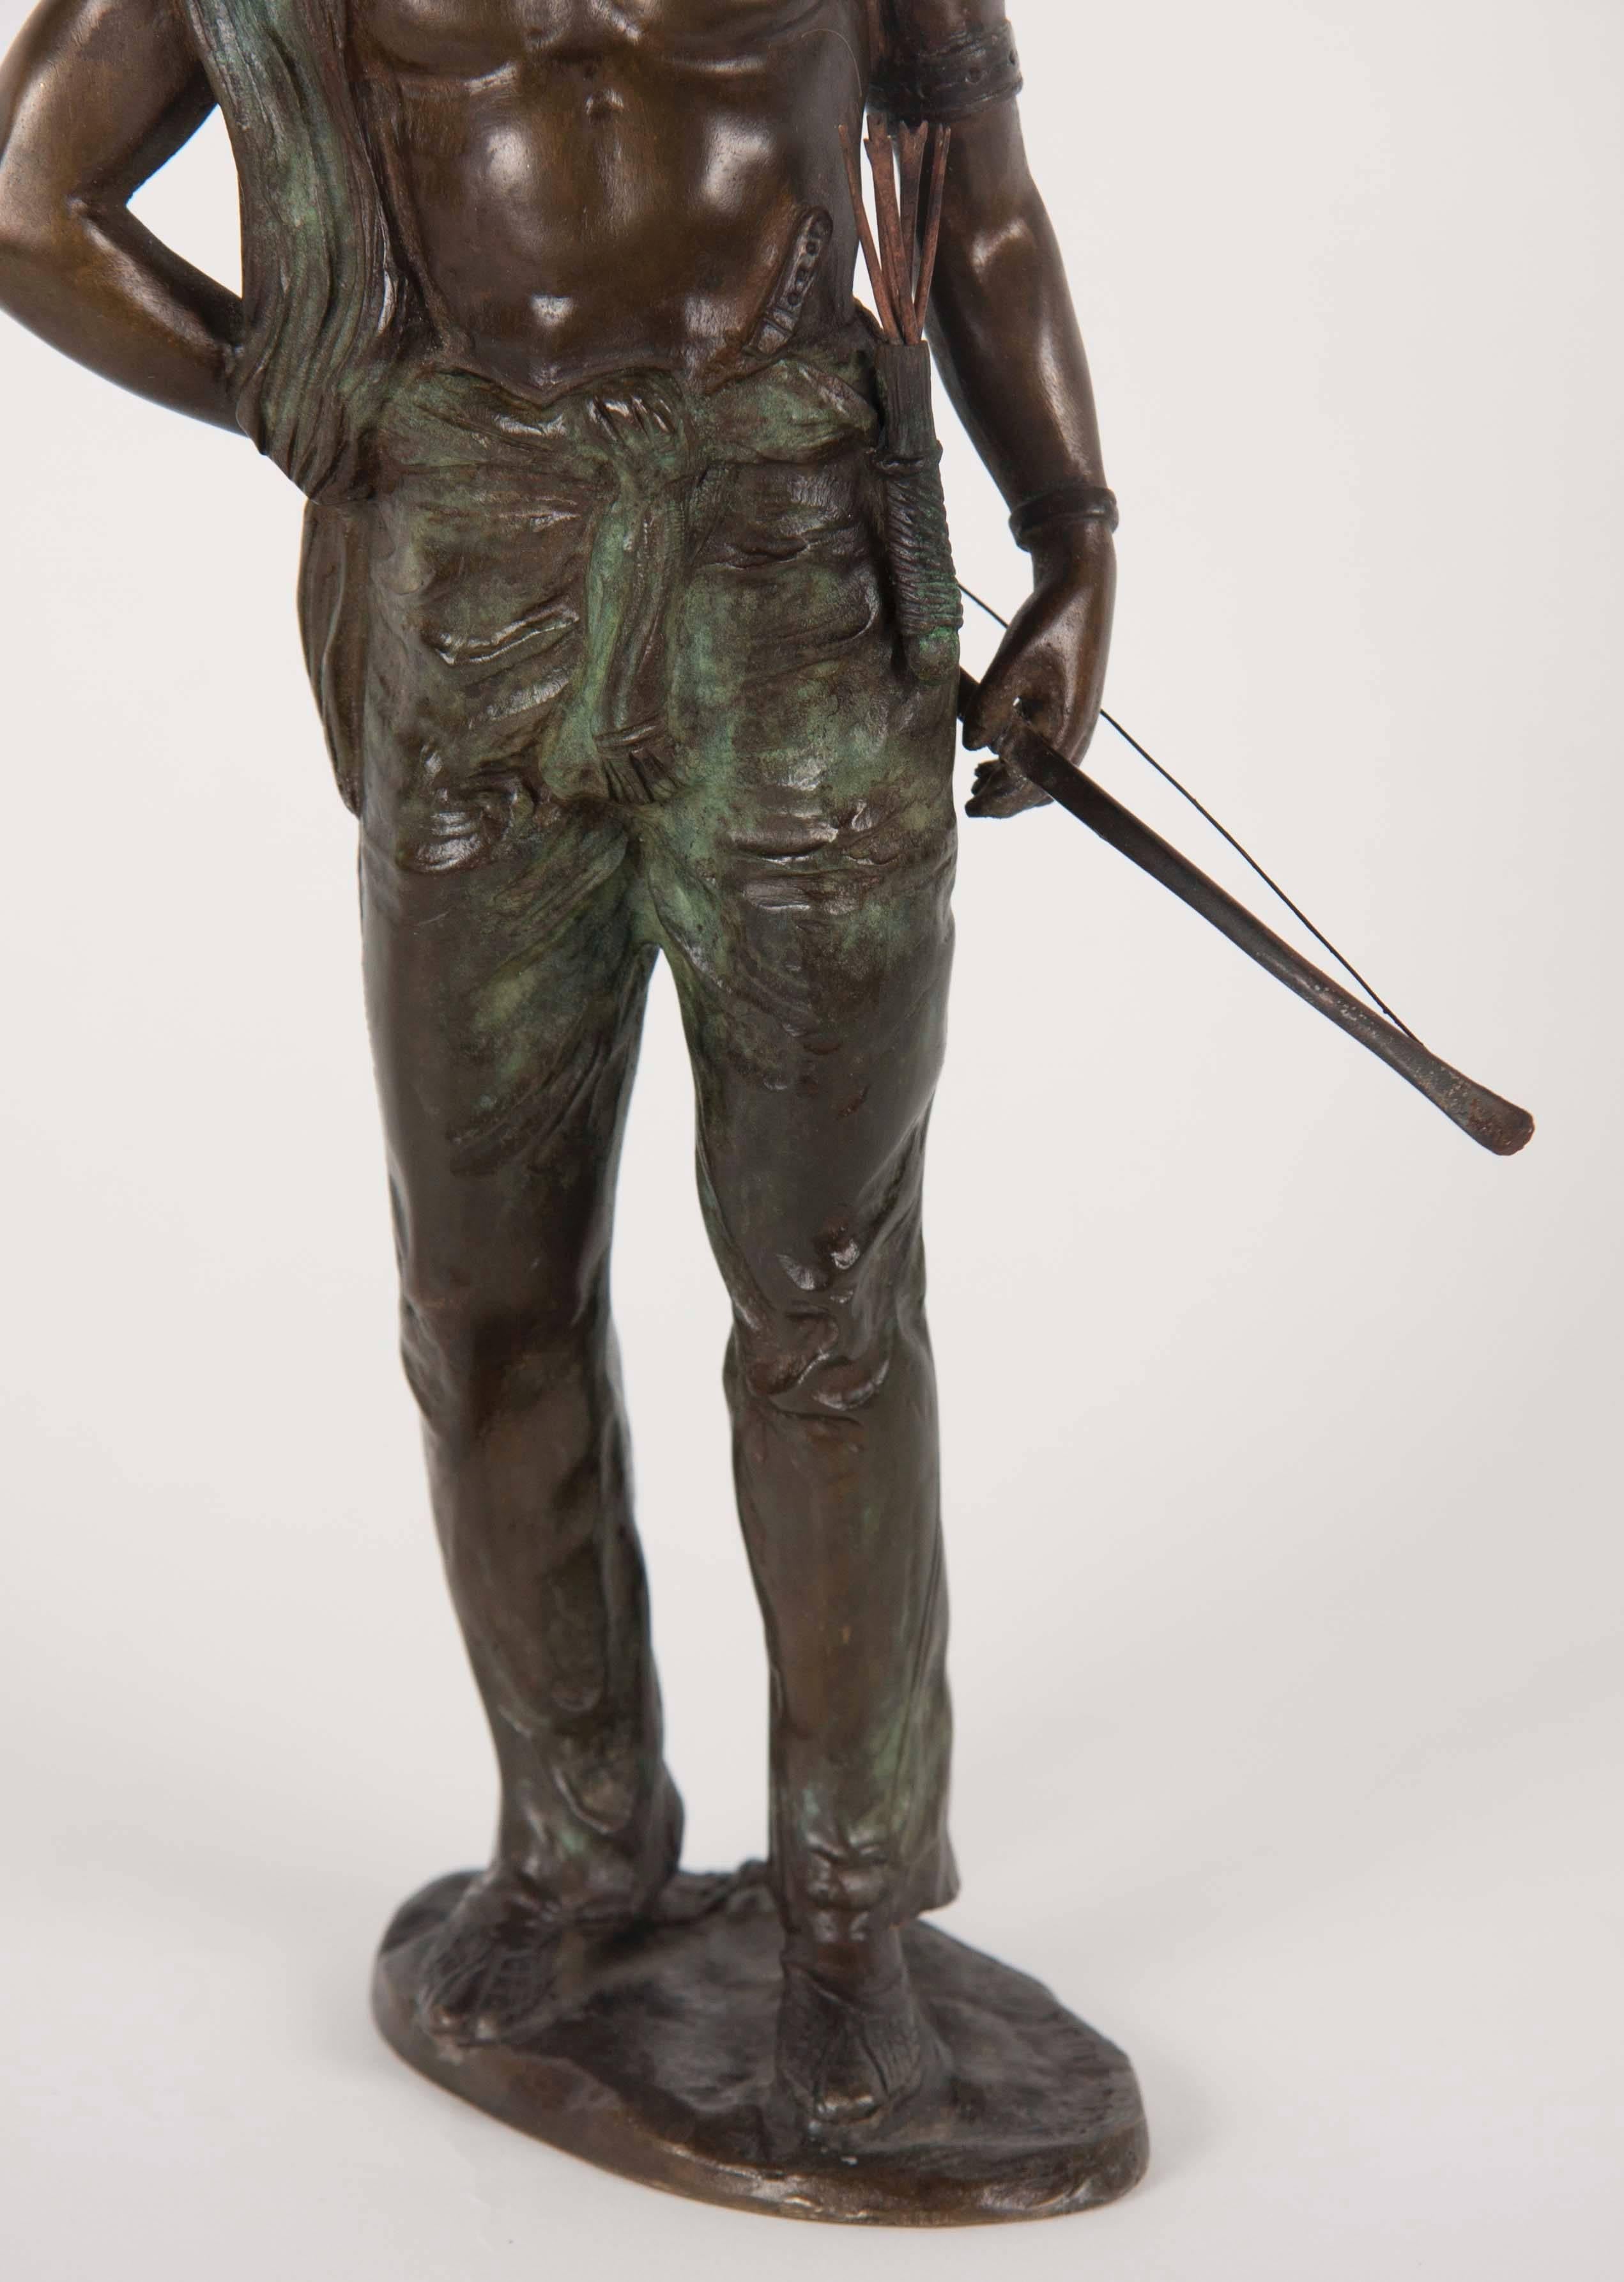 Carl Kauba Bronze of Standing Indian Brave with Bows and Arrows 1